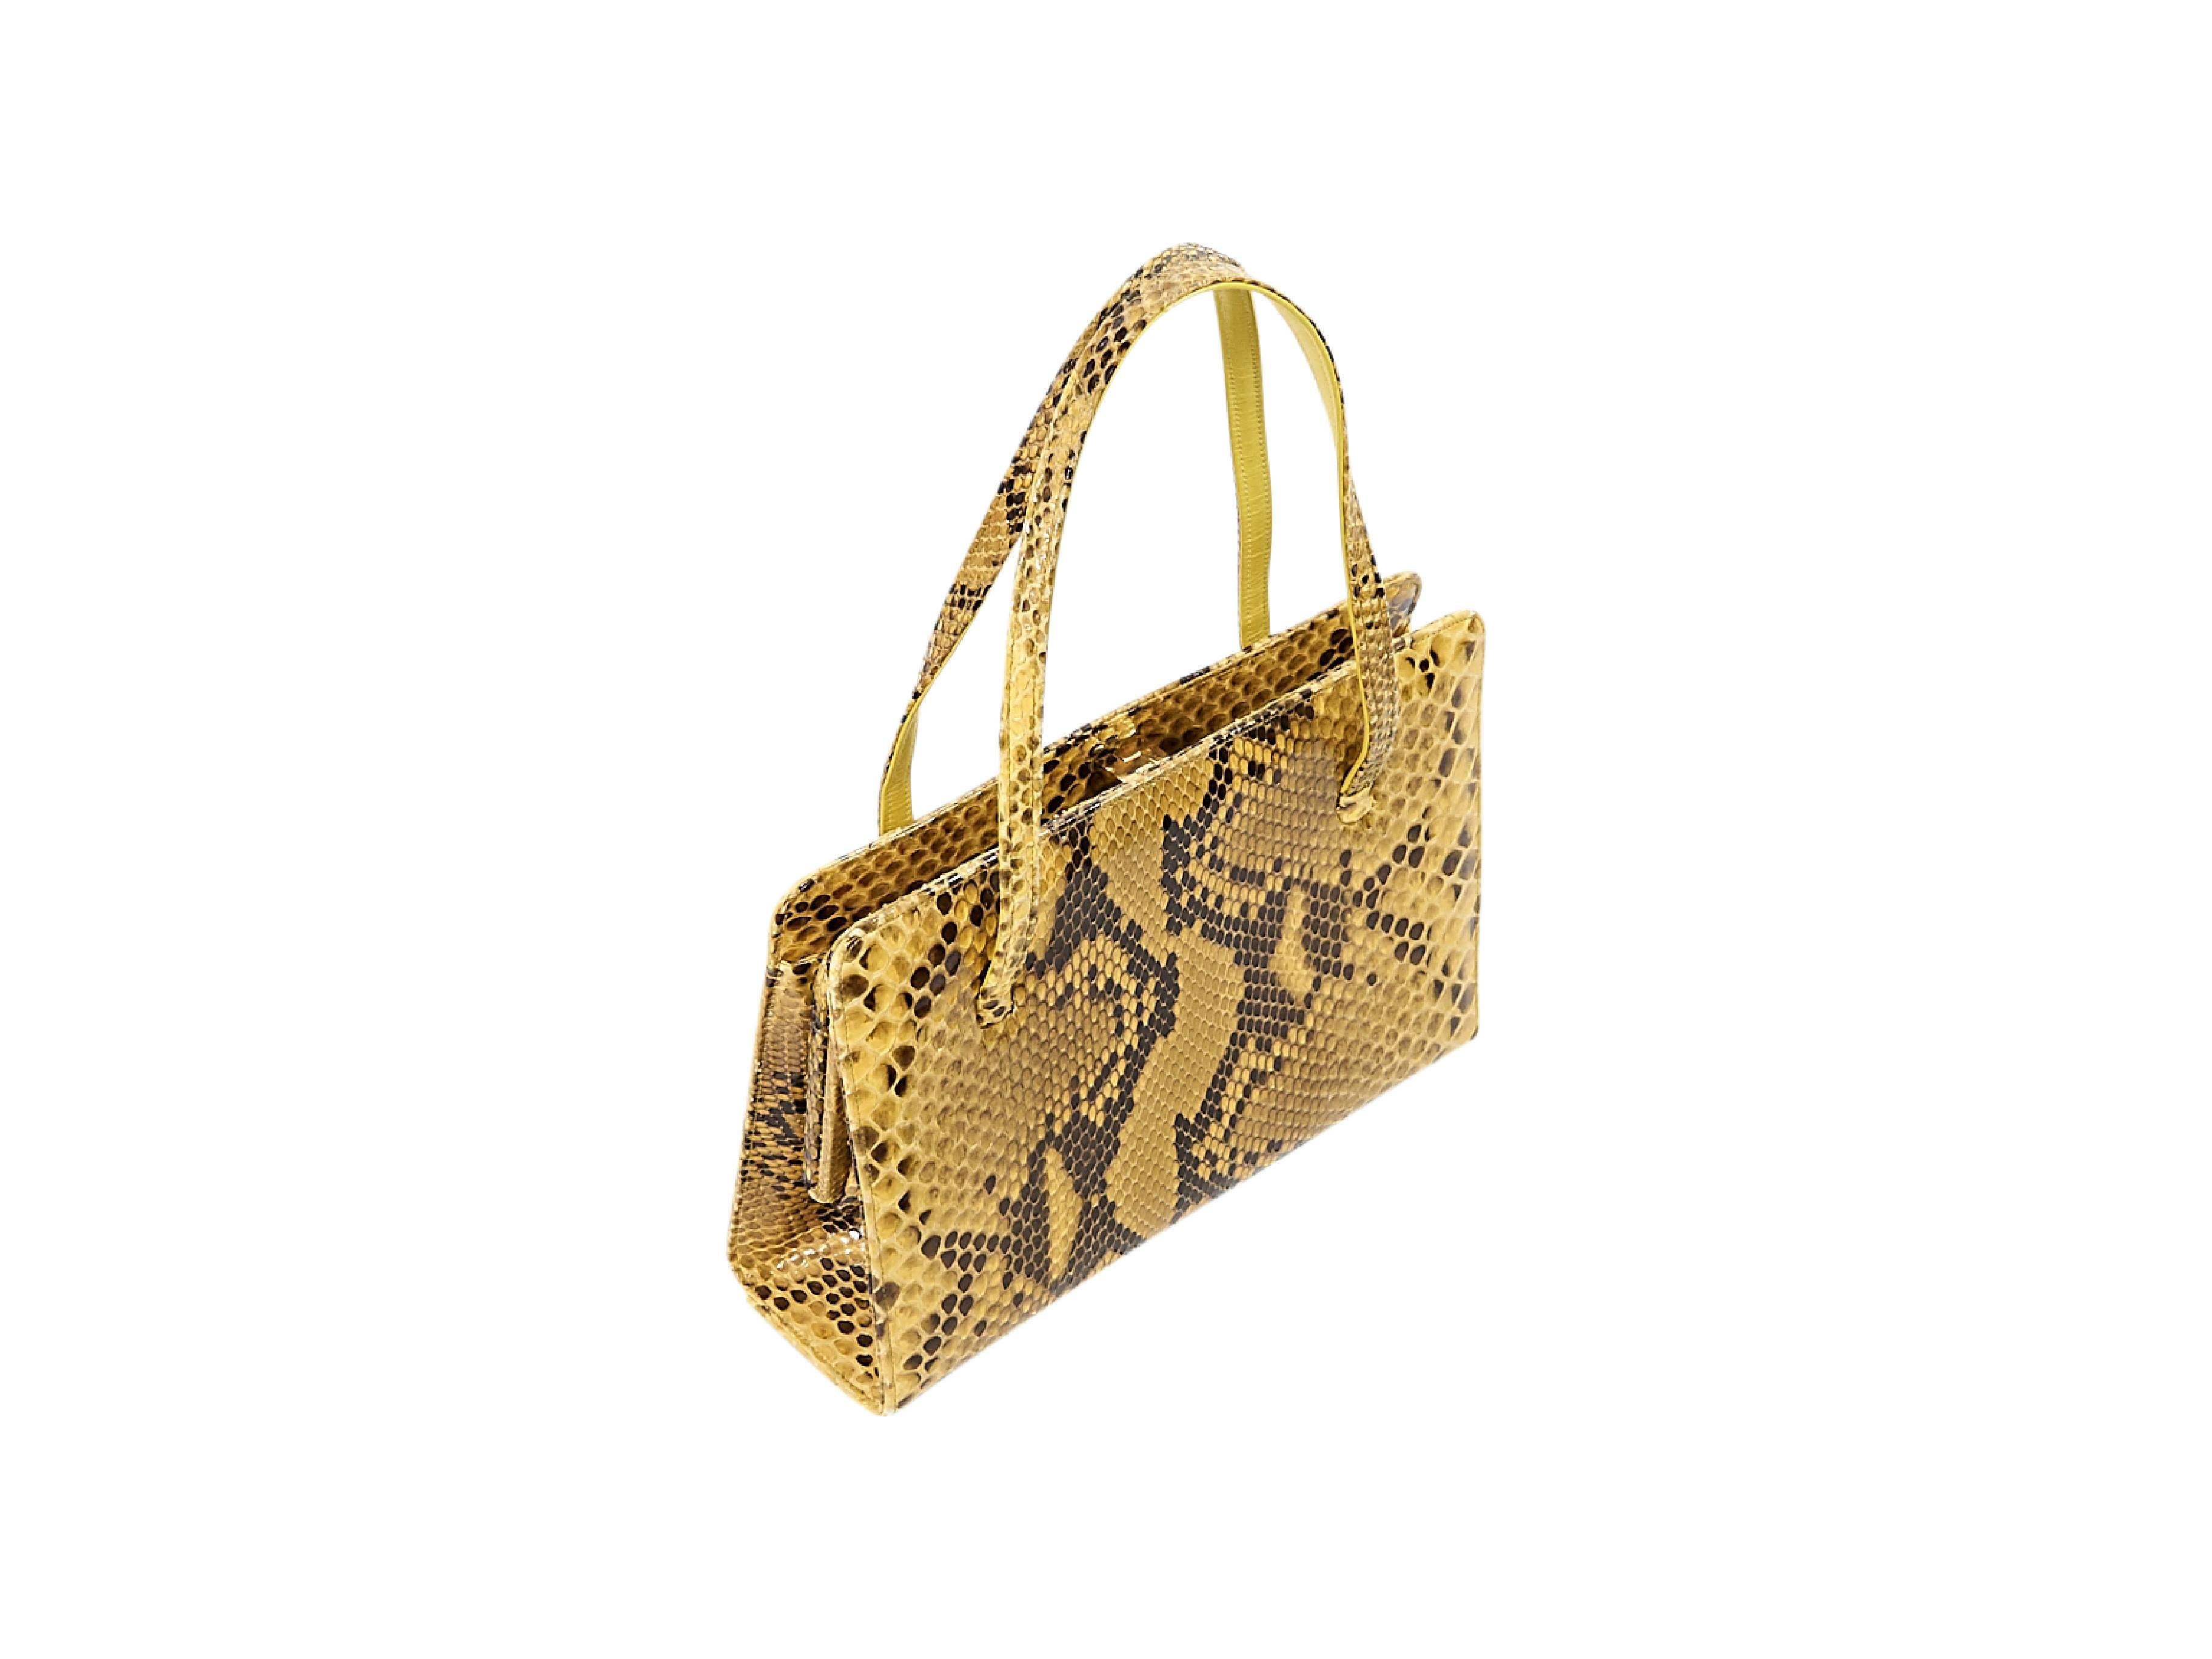 Product details:  Yellow alligator tote bag by Lambertson Truex.  Dual shoulder straps.  Top push-lock closure.  Lined interior with inner zip and slide pockets.  9